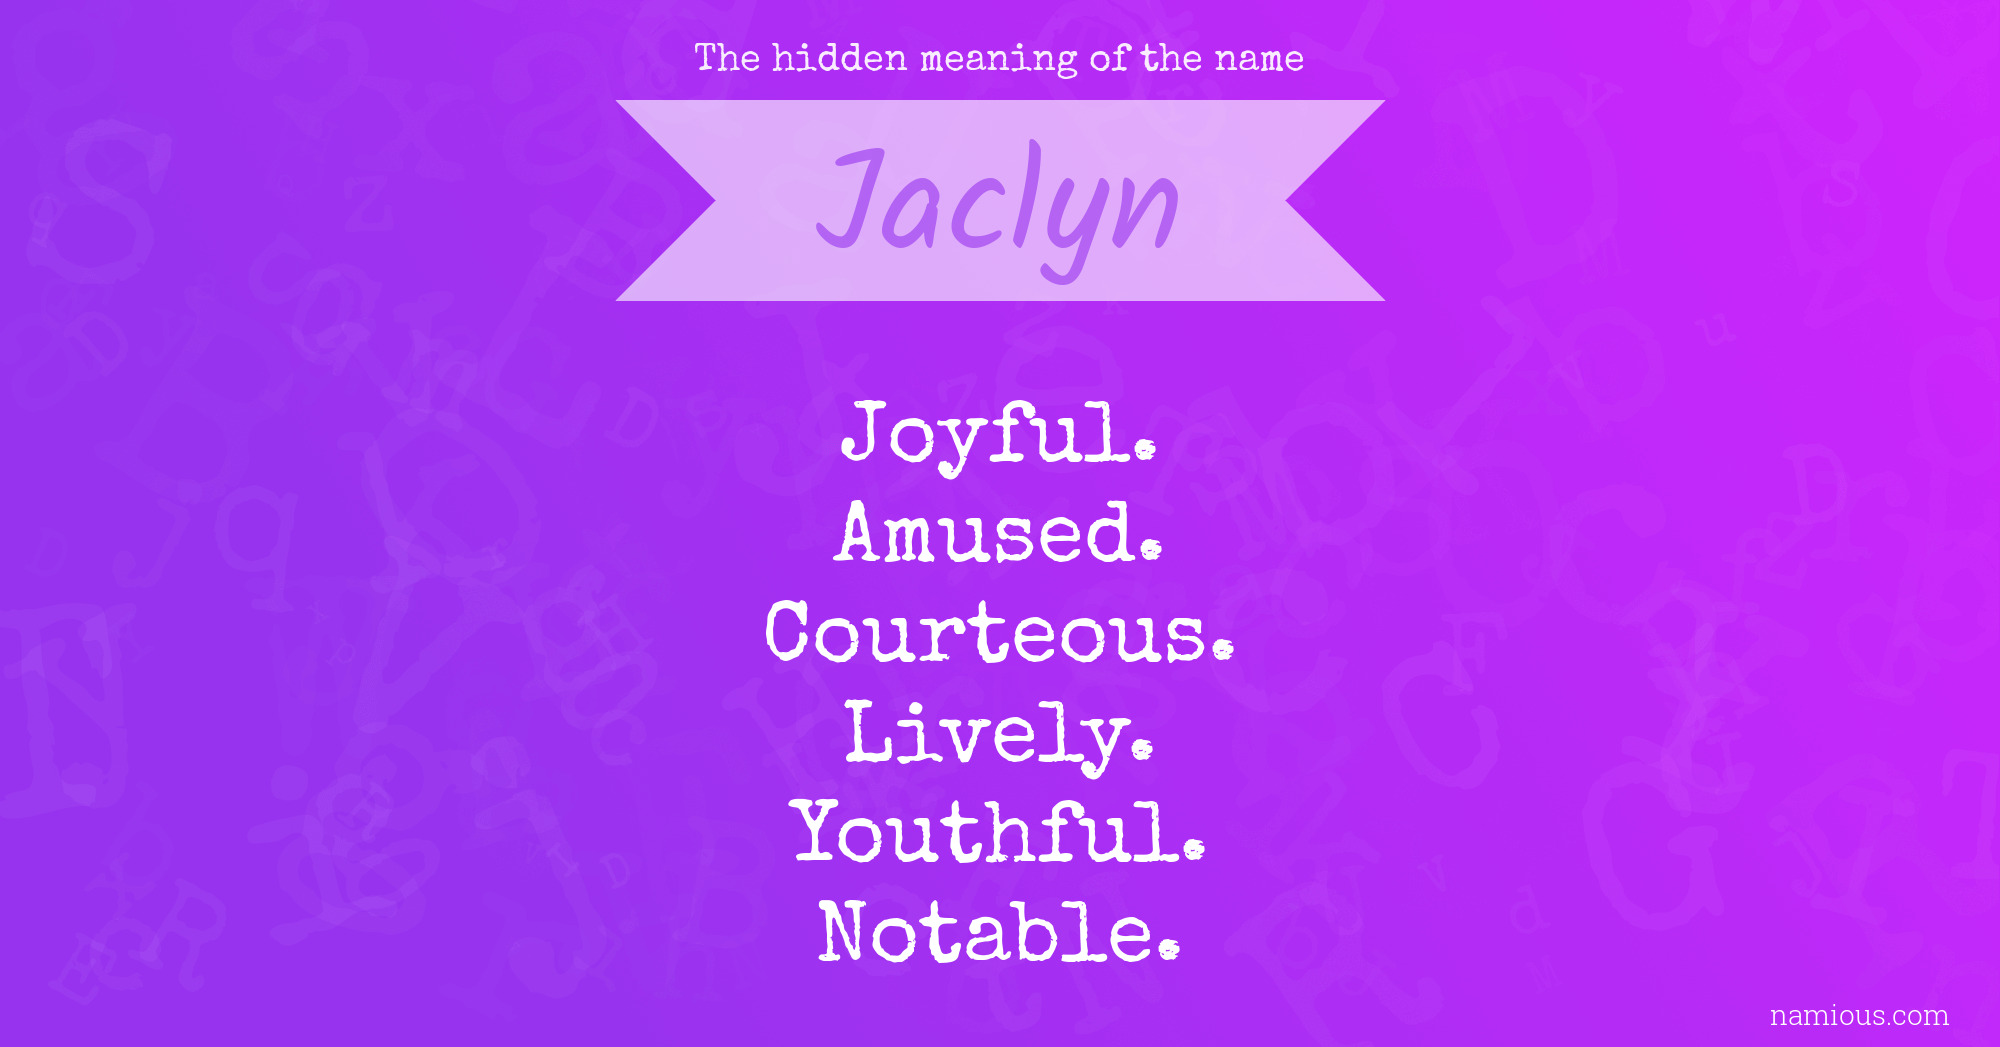 The hidden meaning of the name Jaclyn